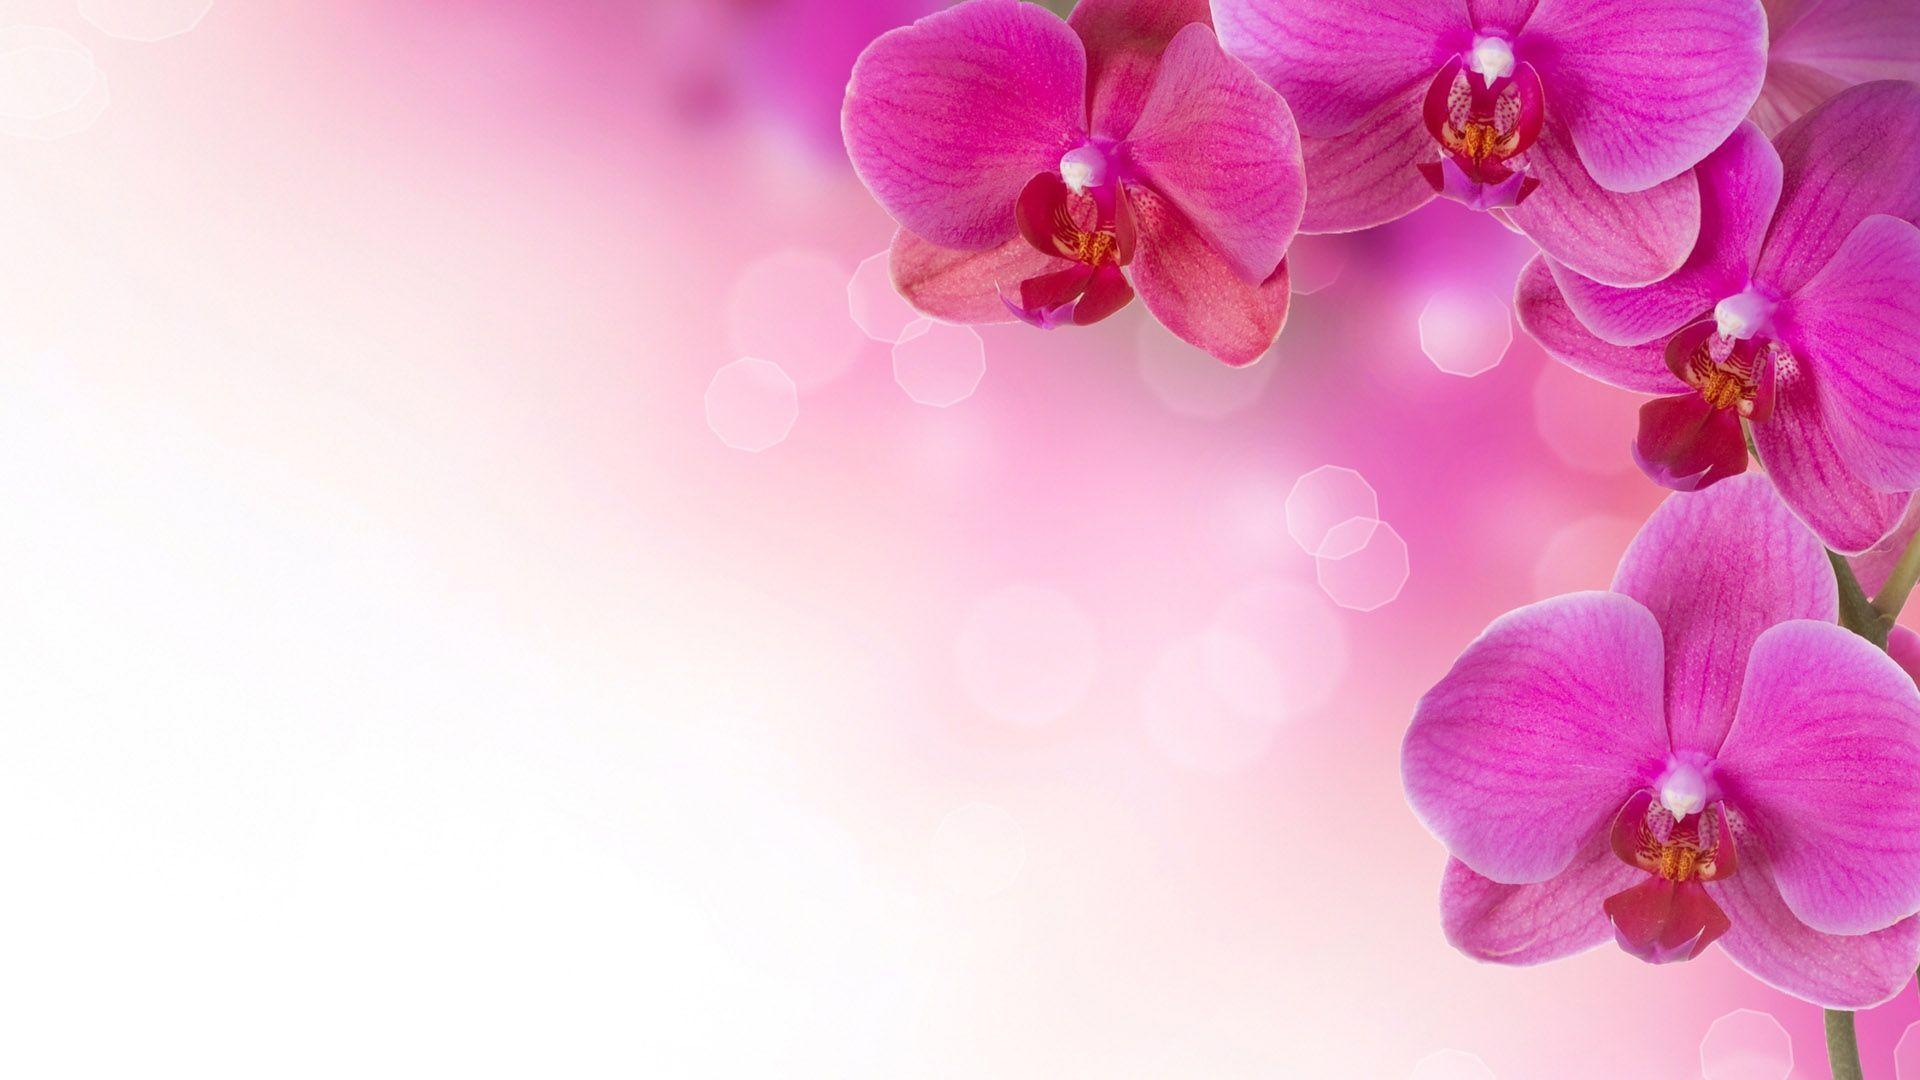 flower pink 1080p HD hd background and Popular Wallpaper 10029